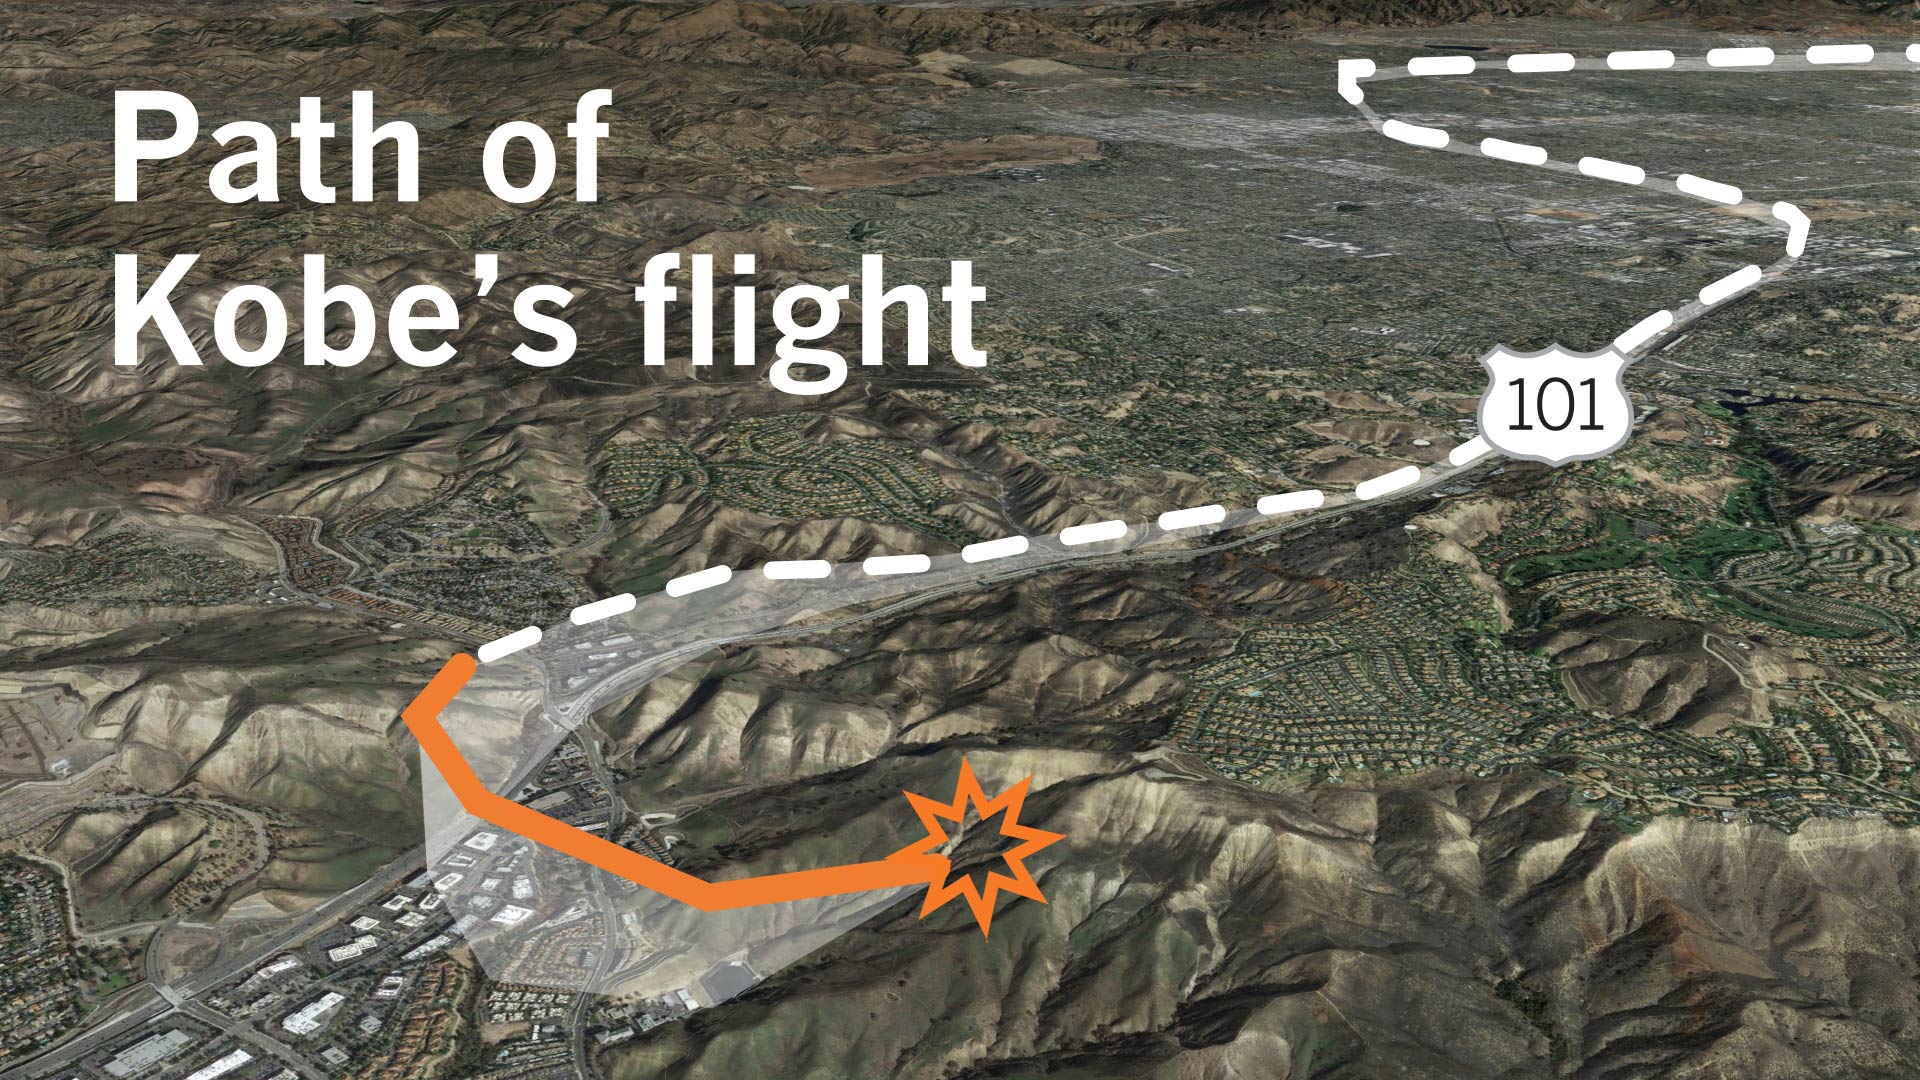 Kobe Bryant detailed helicopter flight map - Los Angeles Times